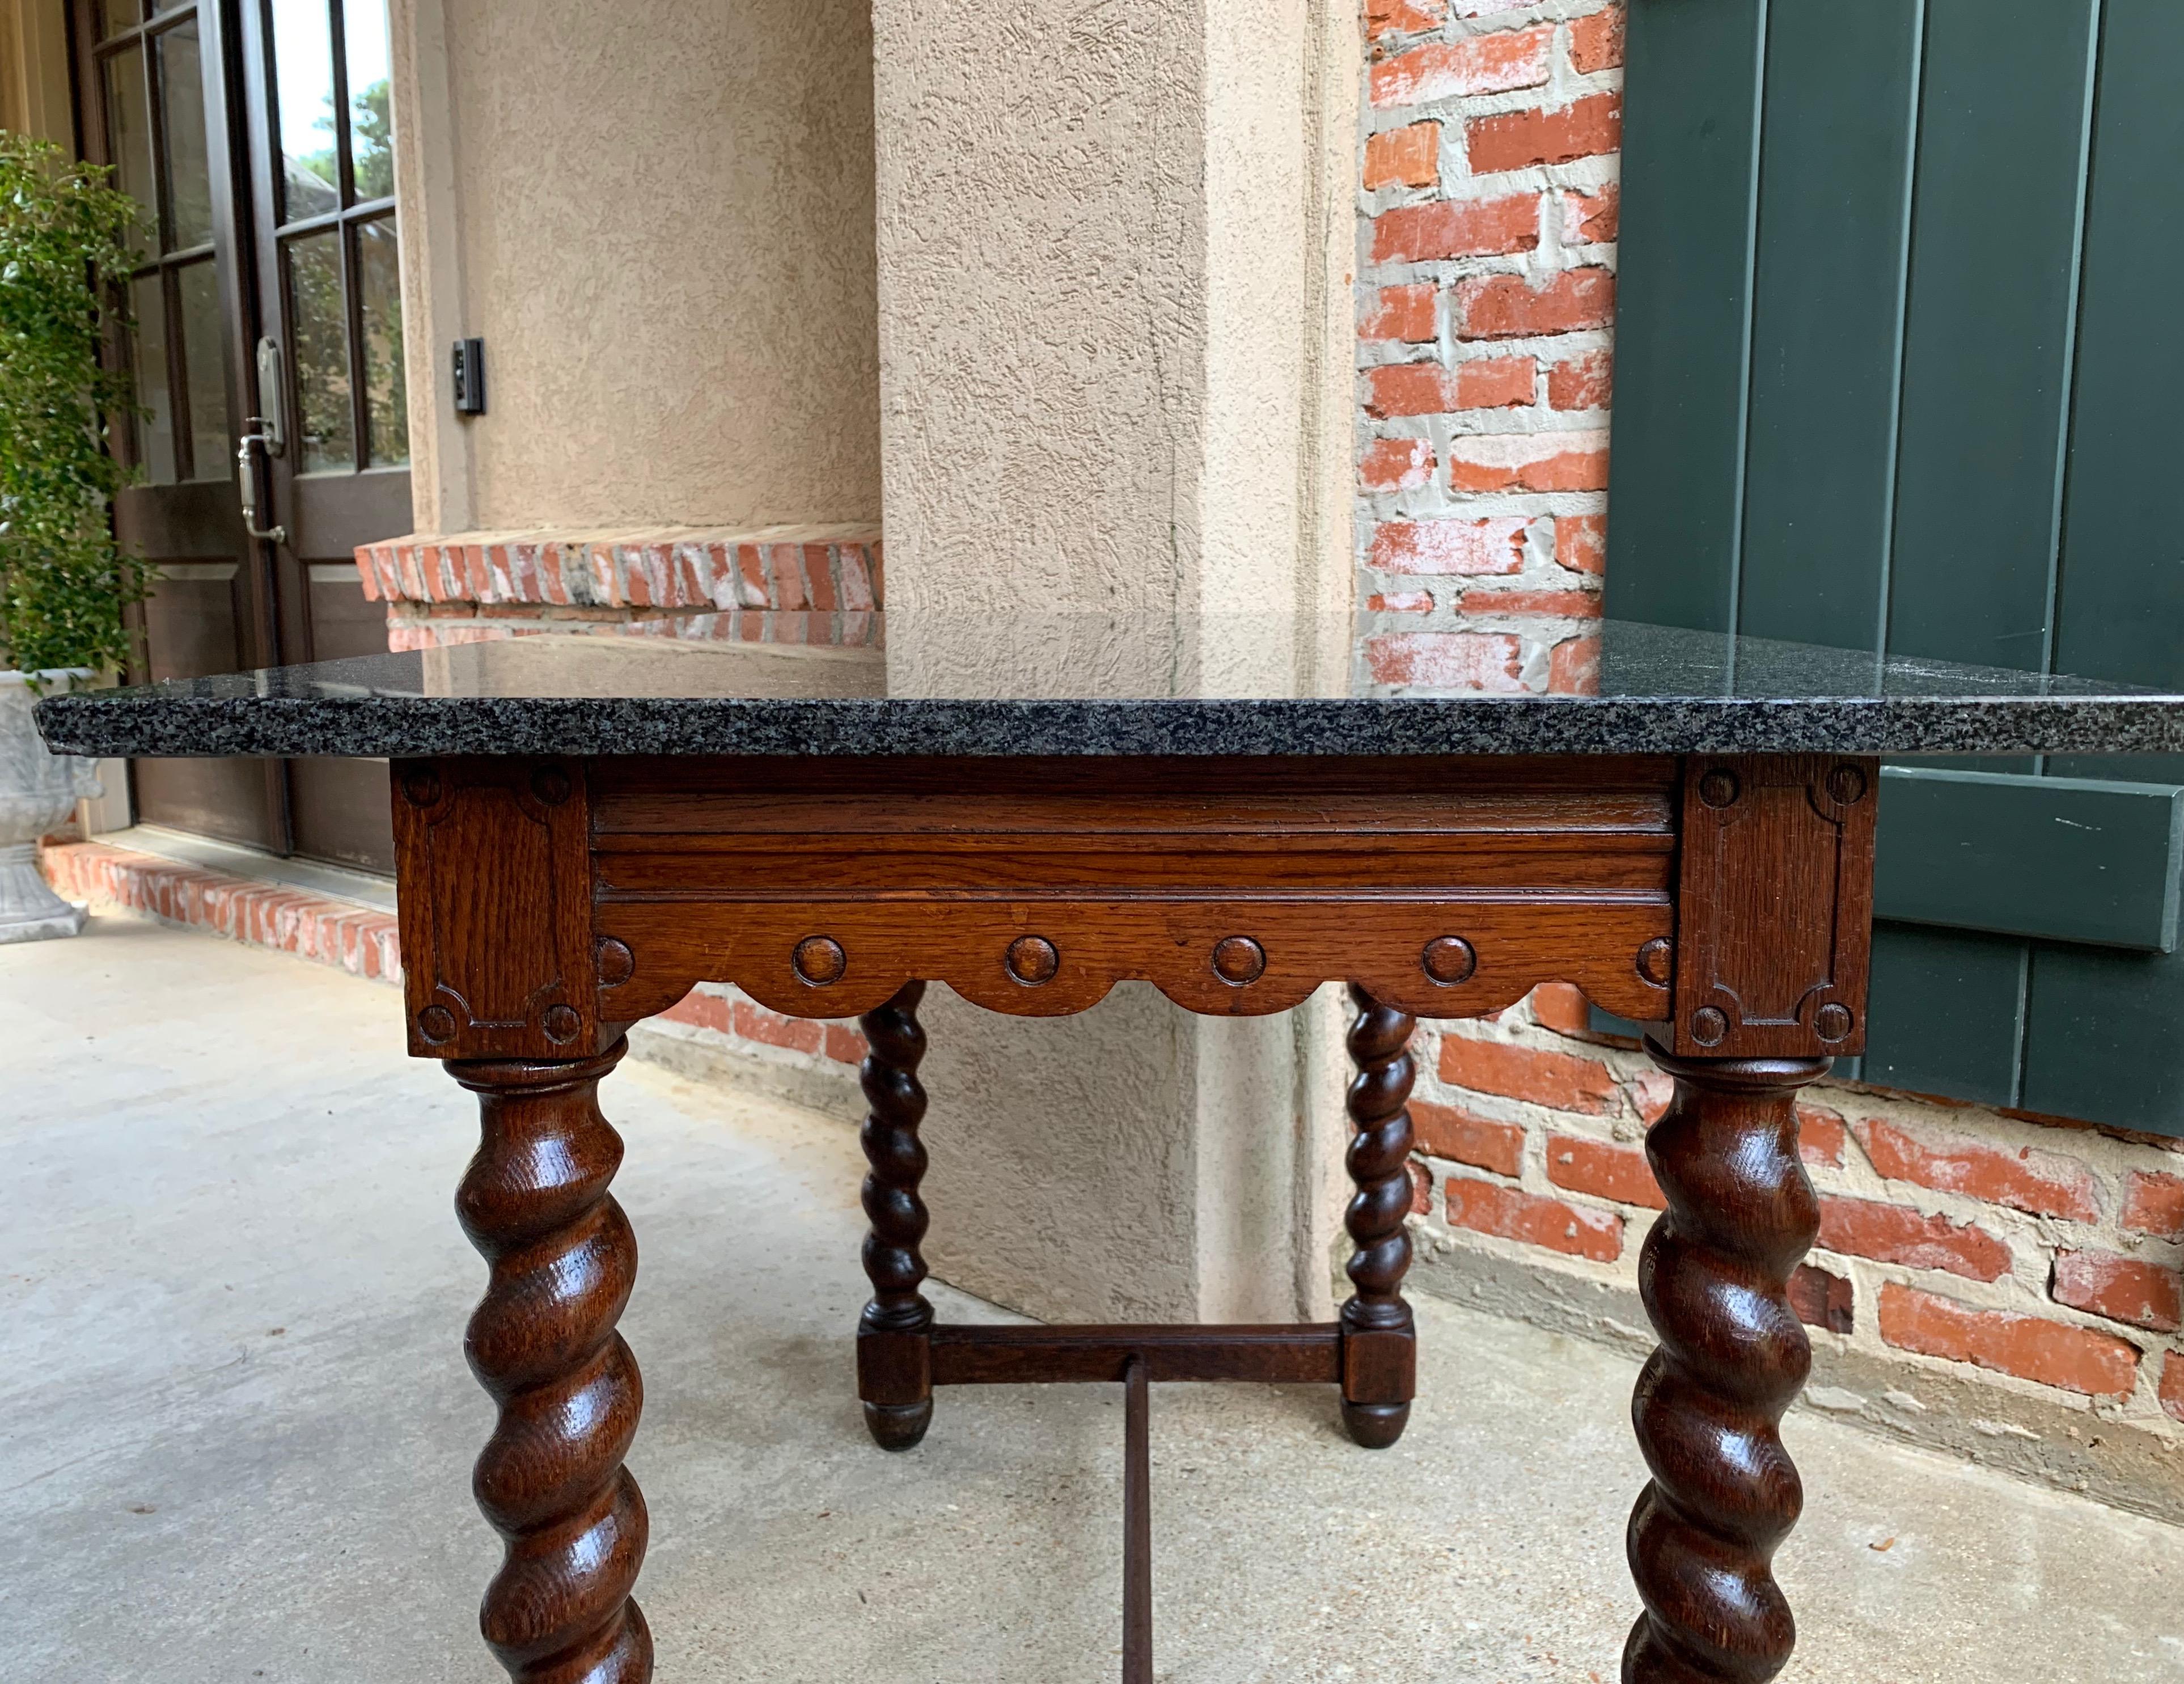 Direct from England, a large antique English oak hall or side table!~
~Oak base features British barley twist legs on all sides, and
a lovely scalloped edge apron~
~Grooves on the scalloped apron with button trim on all sides and the